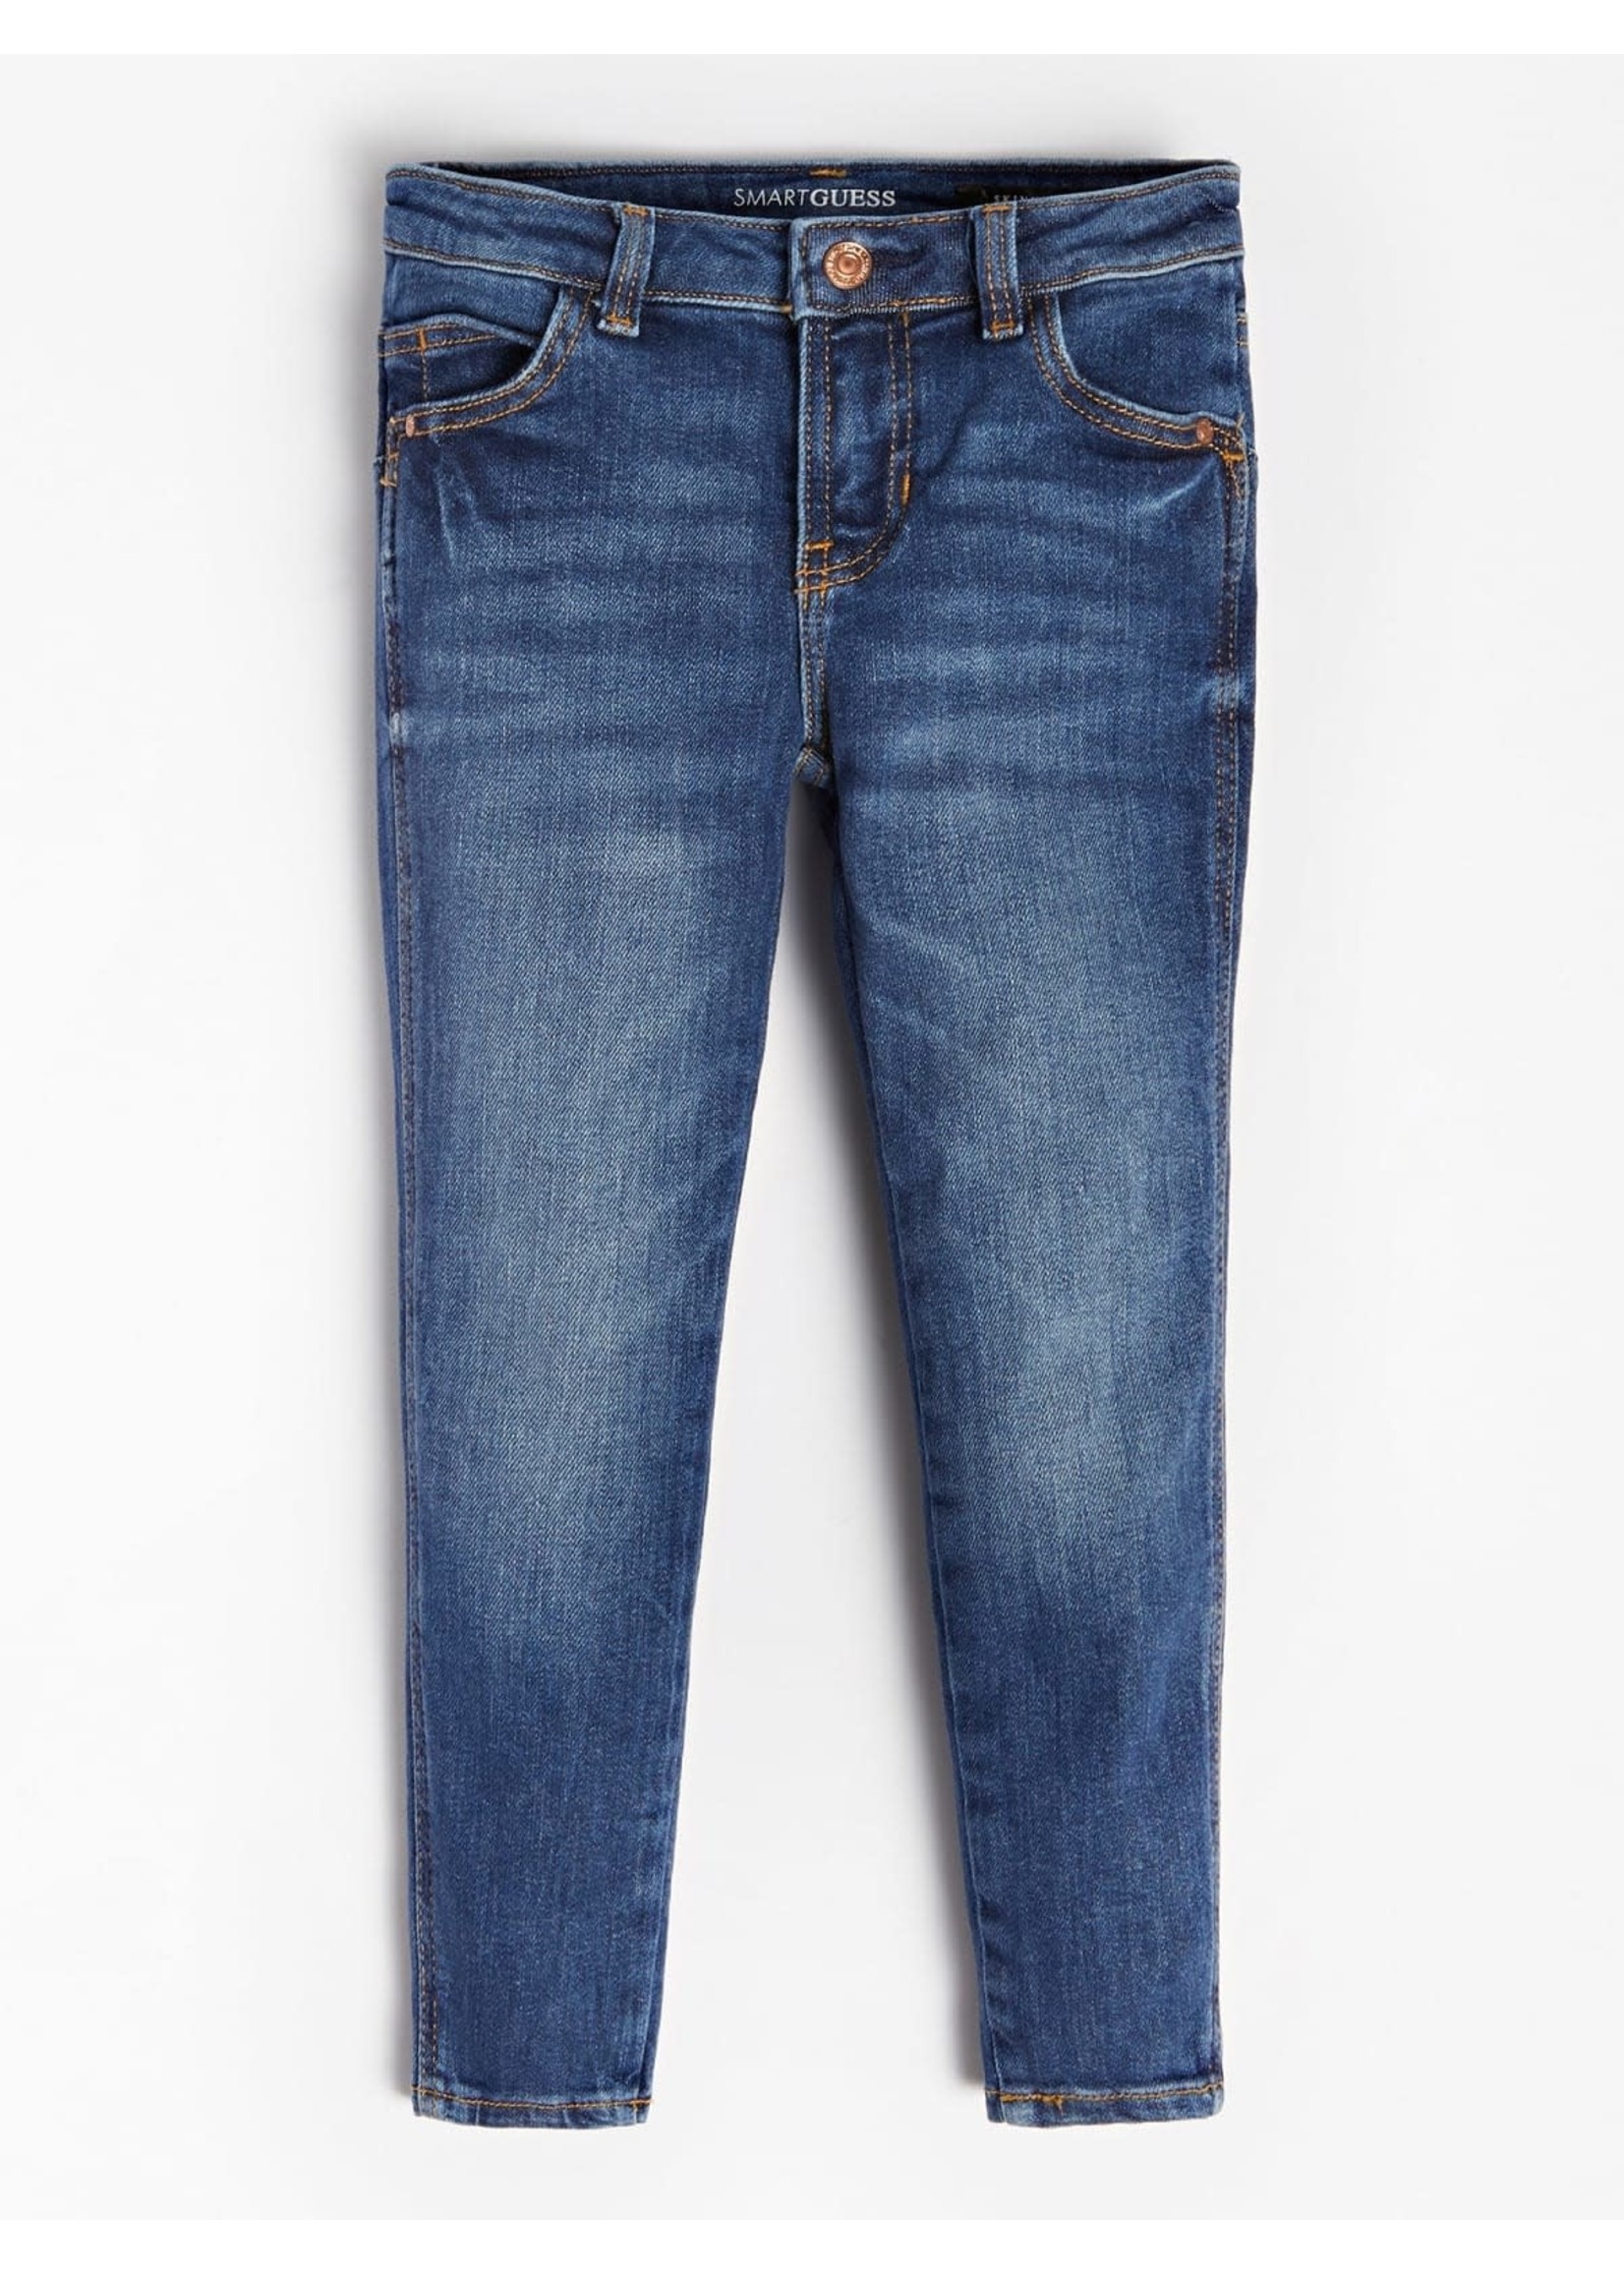 GUESS GUESS Jeans skinny denim carrie mid